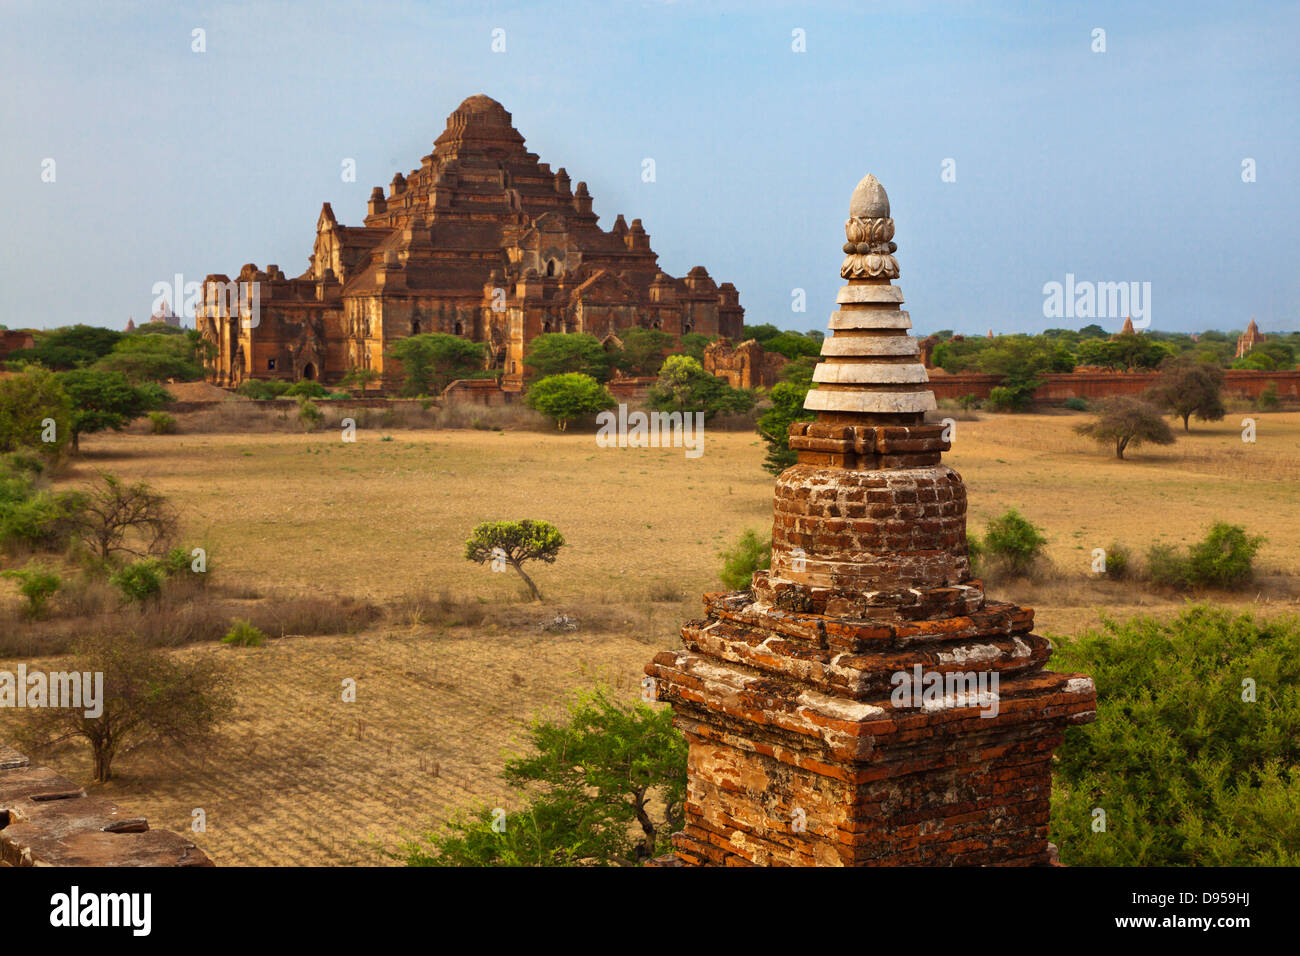 The 12th century DHAMMAYANGYI PAHTO or TEMPLE is the largest in BAGAN and was probably built by Narathu Stock Photo